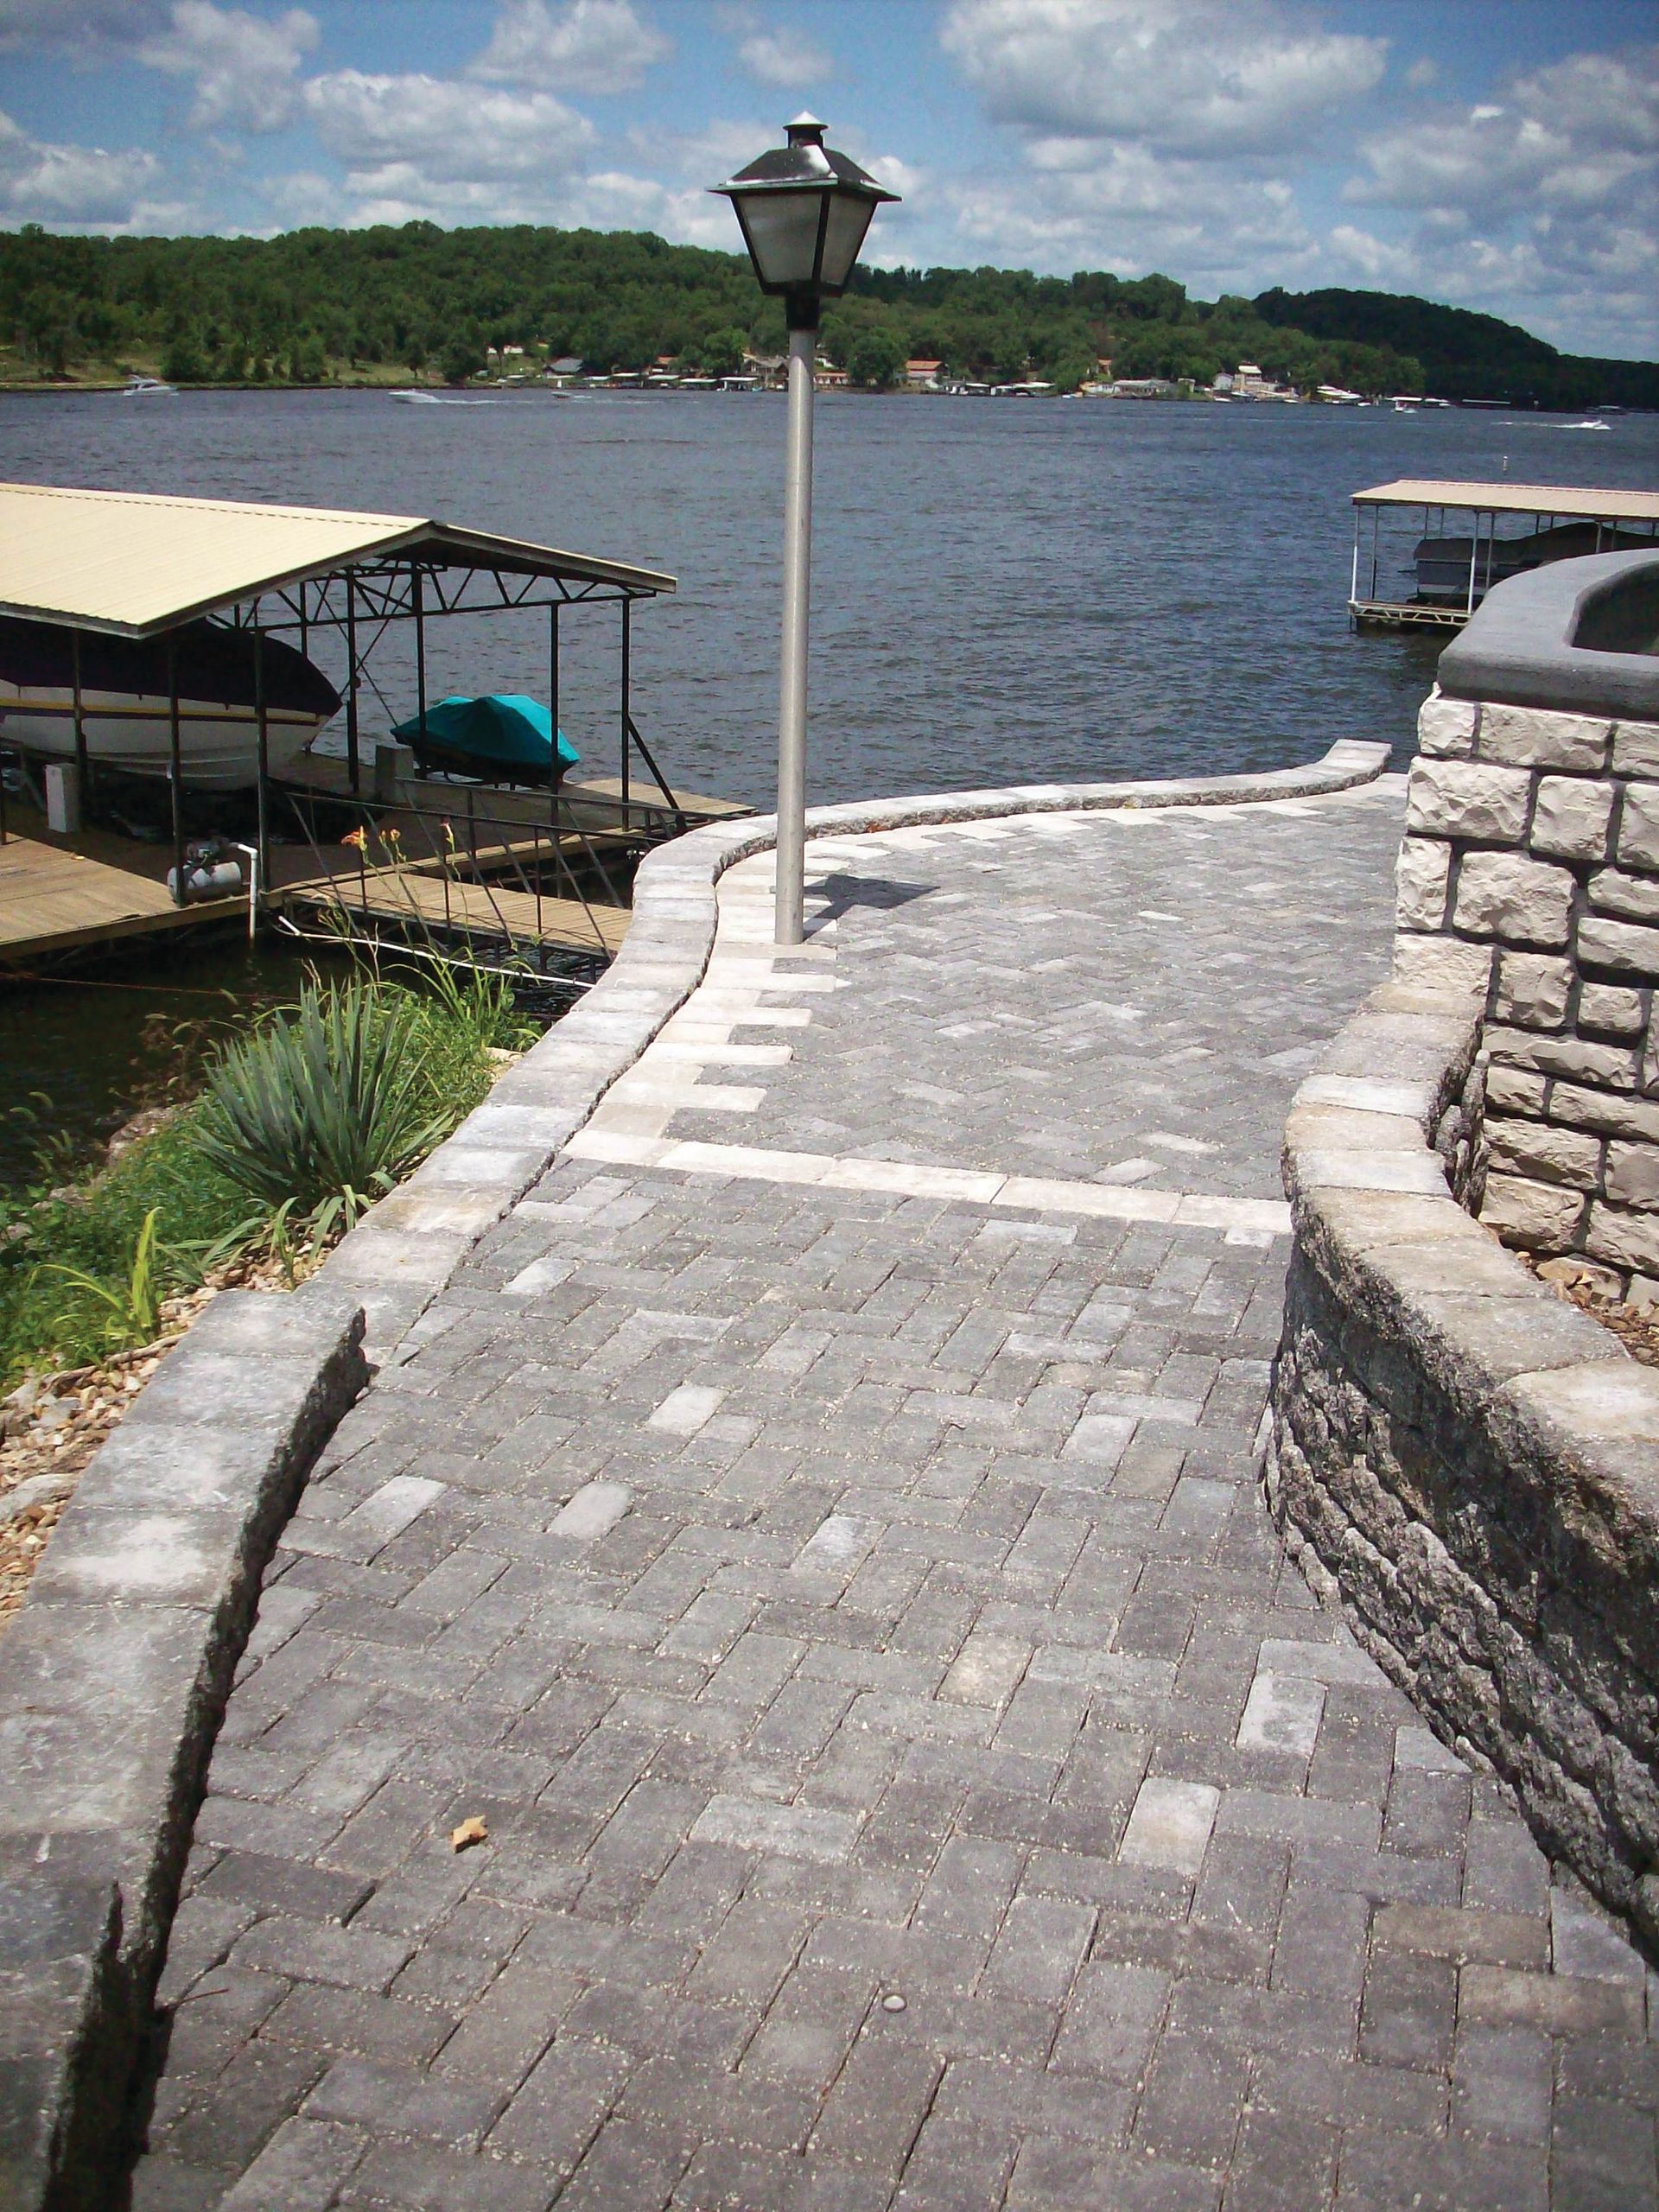 Hollund Stone Pavers Are the Perfect Choice for Your Patio or Walkway in Missouri. Shop at Stockmans